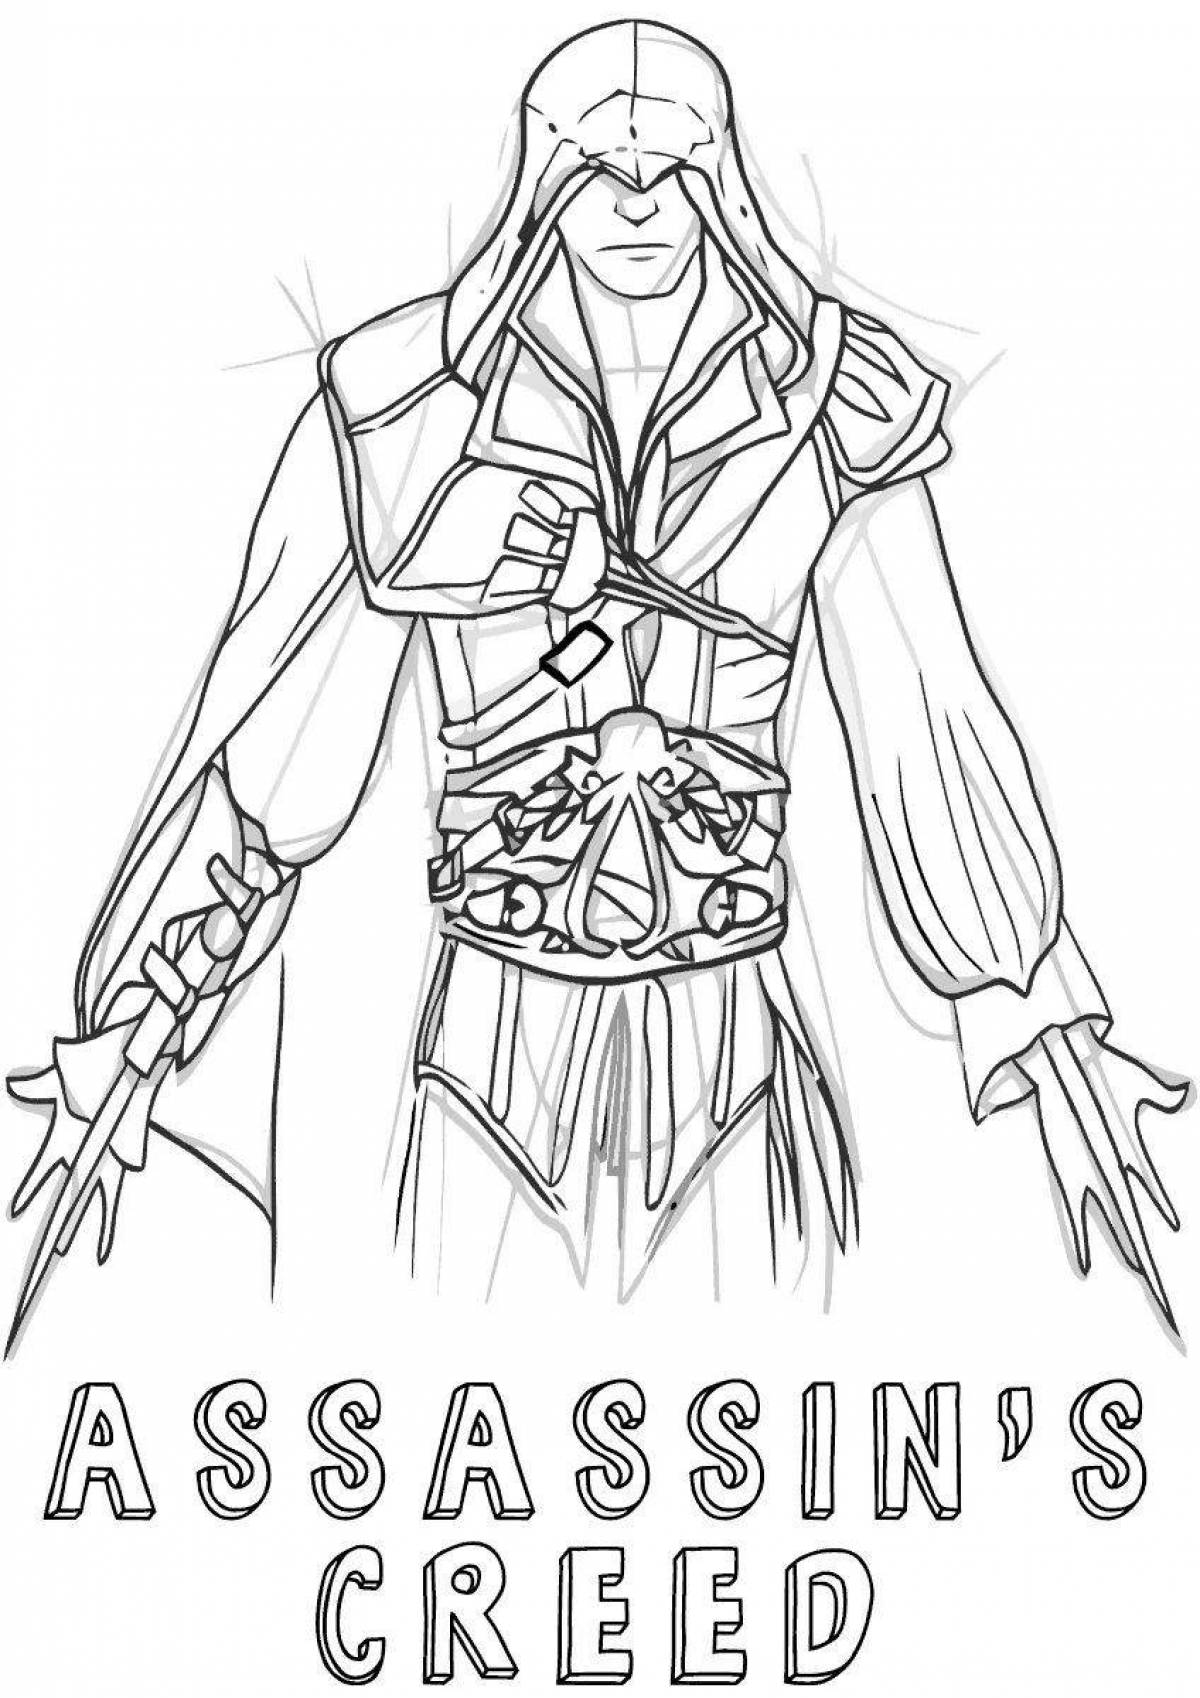 Assassin's creed glitter coloring book